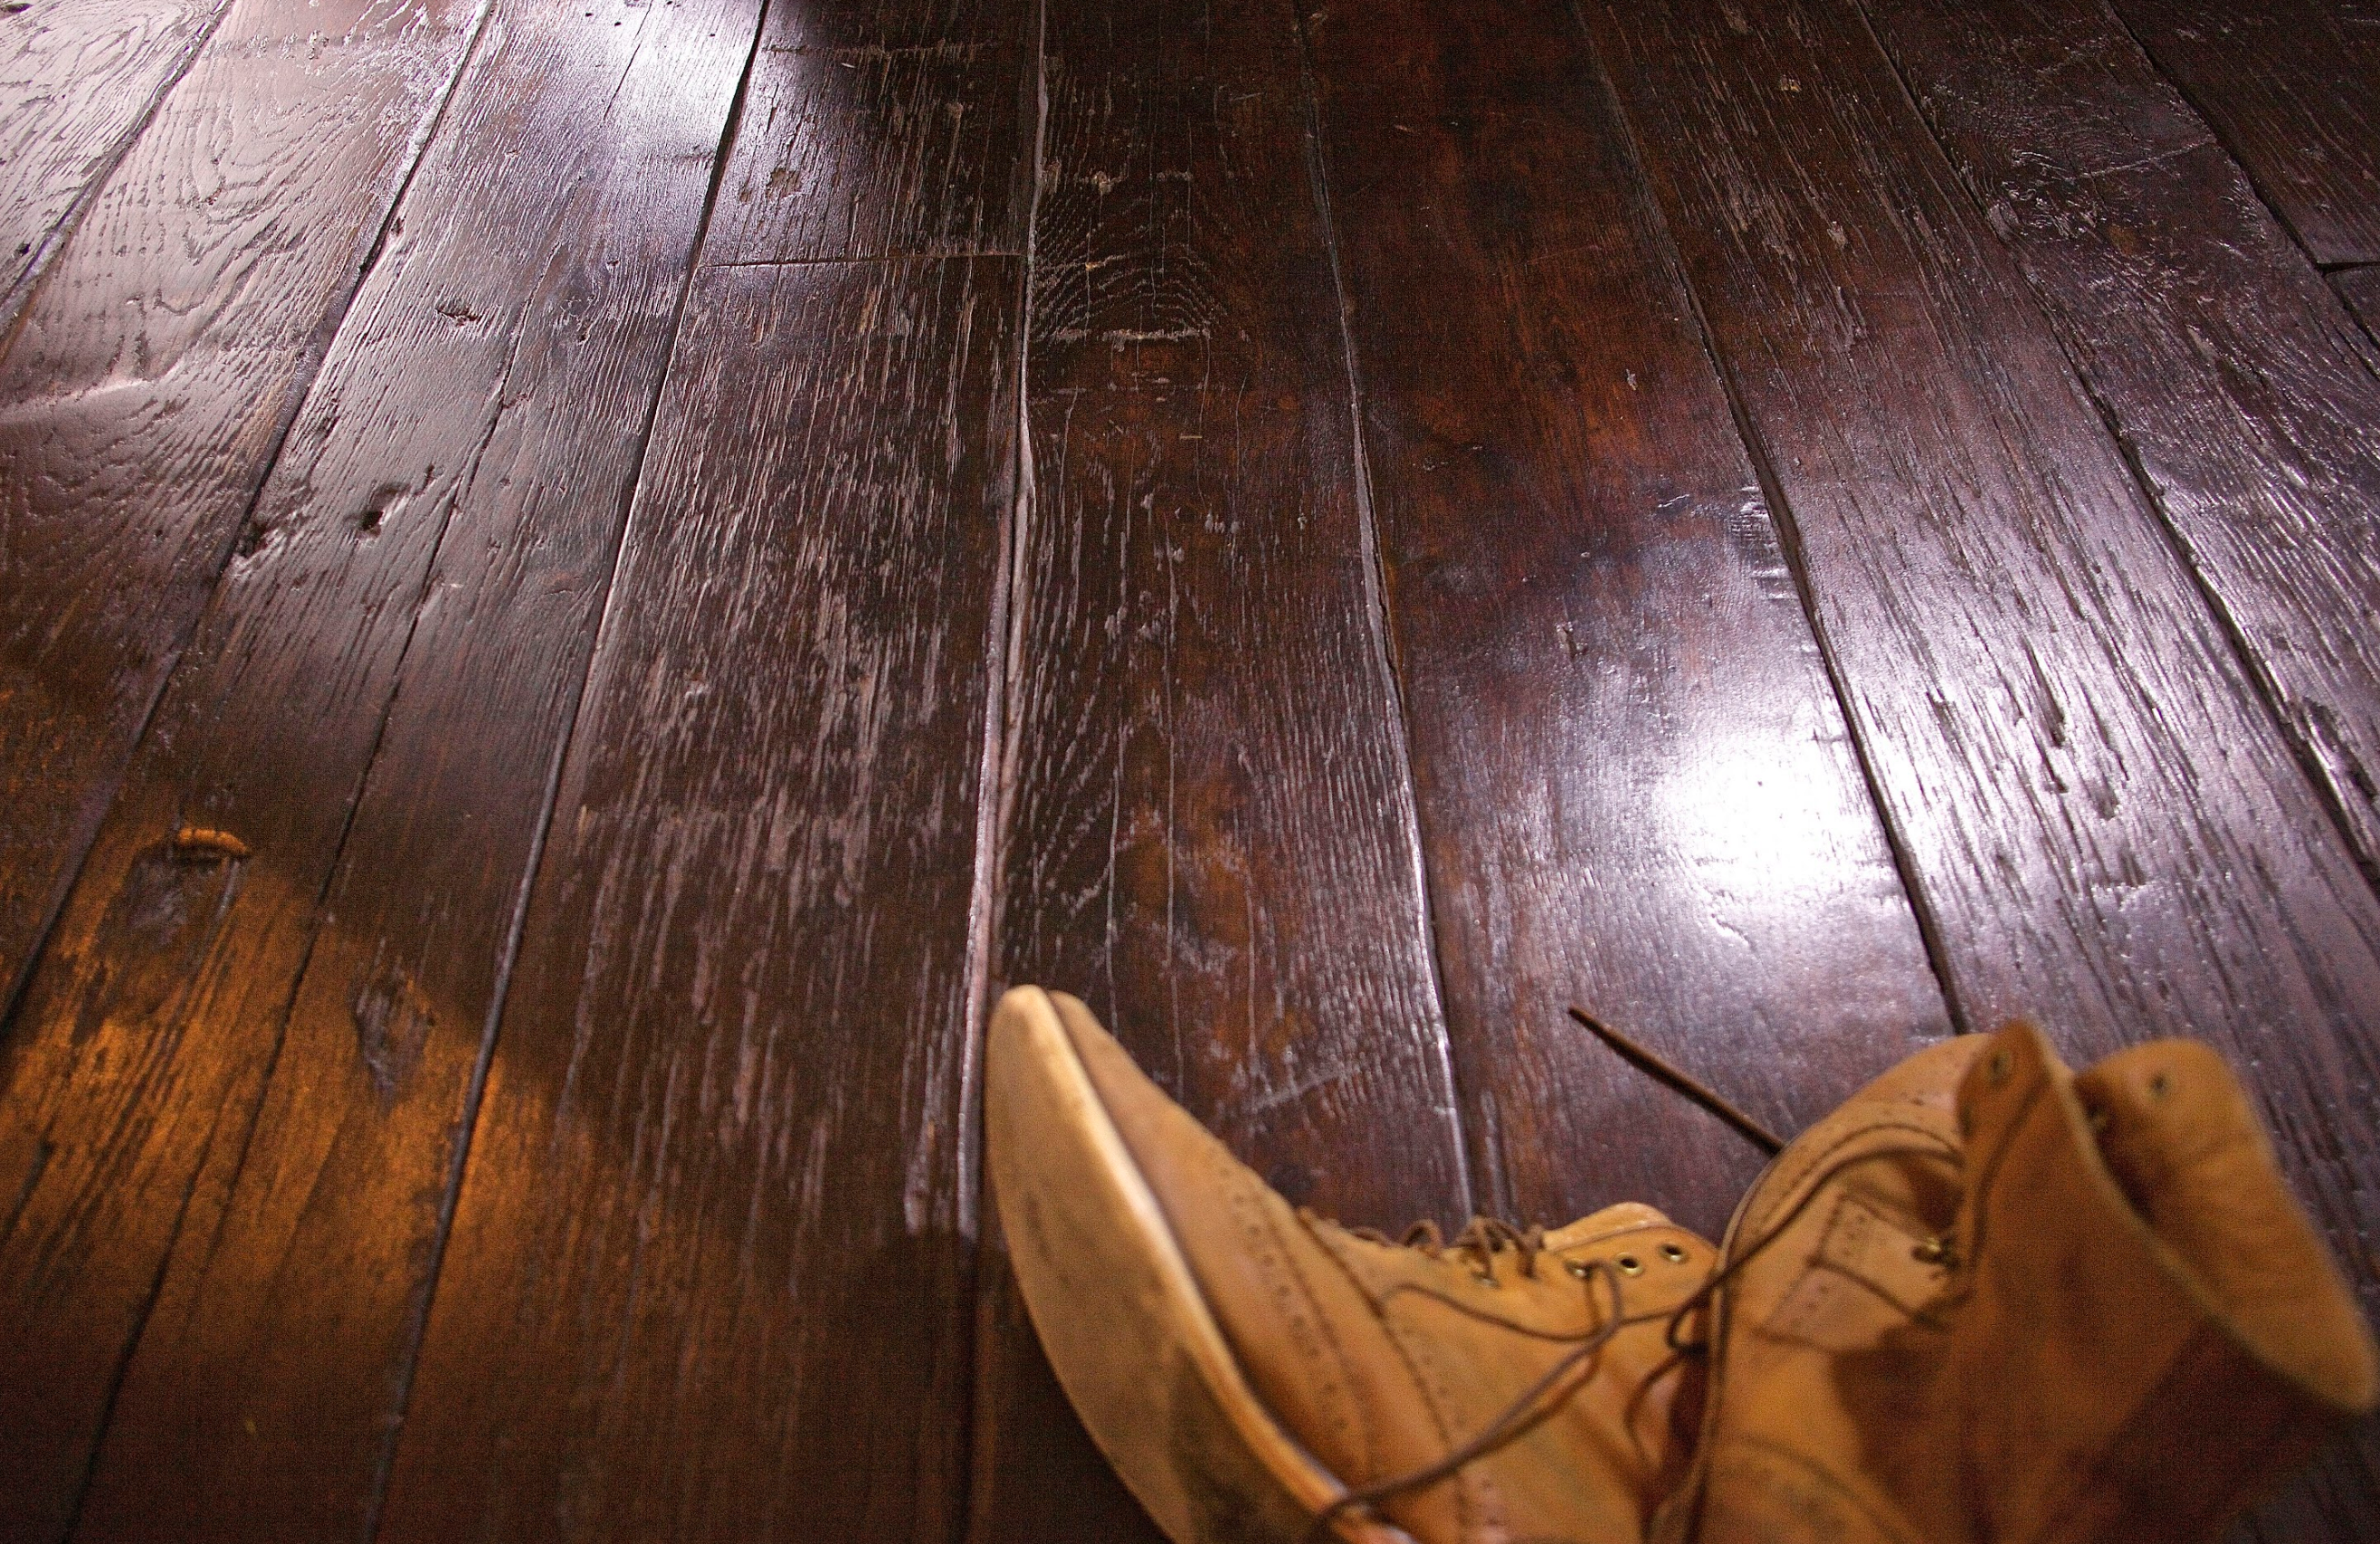 Can You Use Steam Mops to Clean Wood Floors?